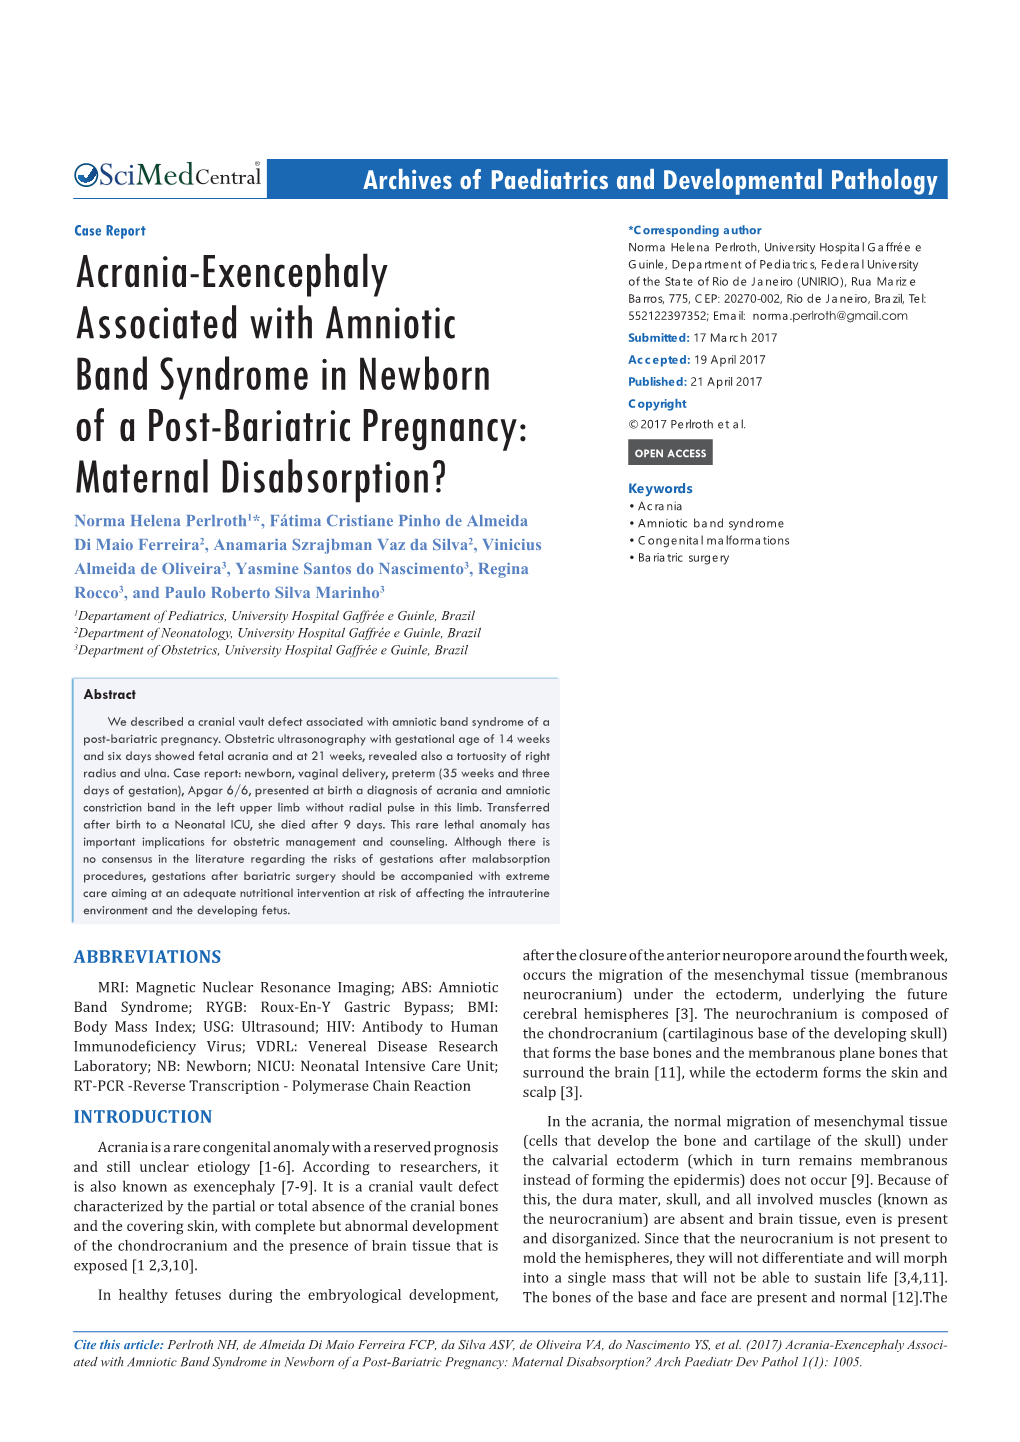 Acrania-Exencephaly Associated with Amniotic Band Syndrome in Newborn of a Post-Bariatric Pregnancy: Maternal Disabsorption? Arch Paediatr Dev Pathol 1(1): 1005